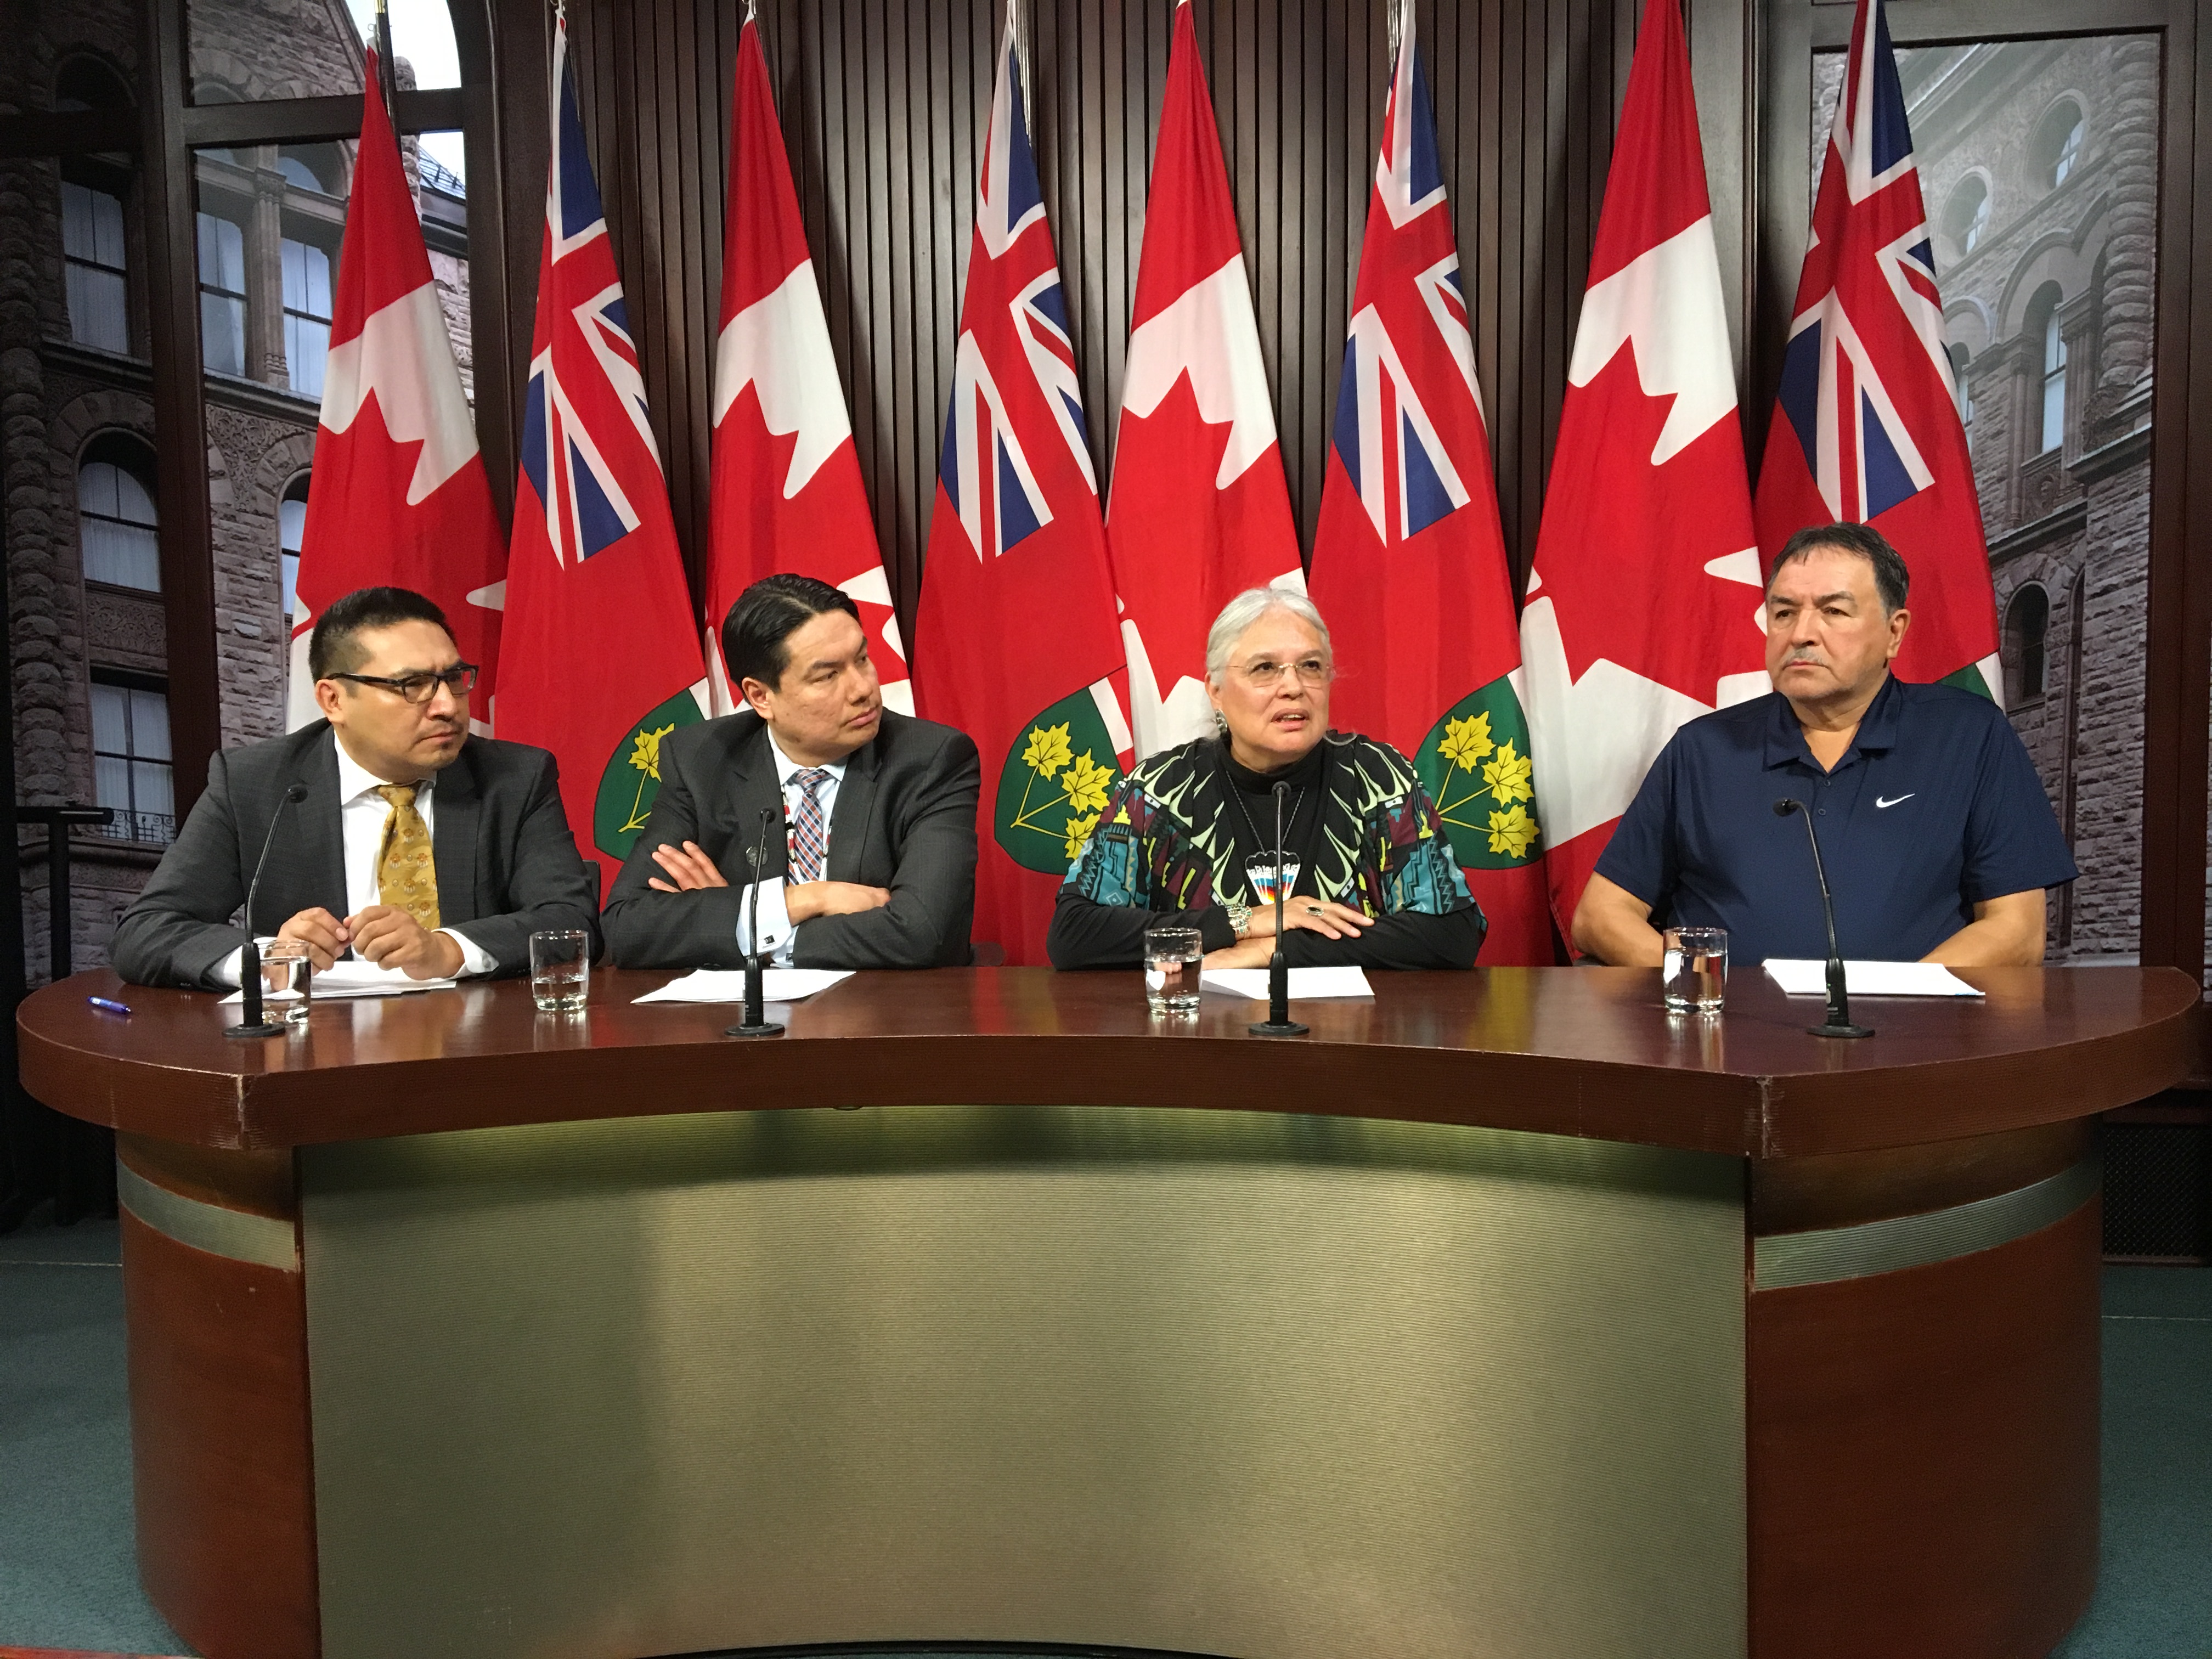 Ontario can ‘take the lead’ on reconciliation by passing Mamakwa’s Indigenous rights bill: Chief Ava Hill